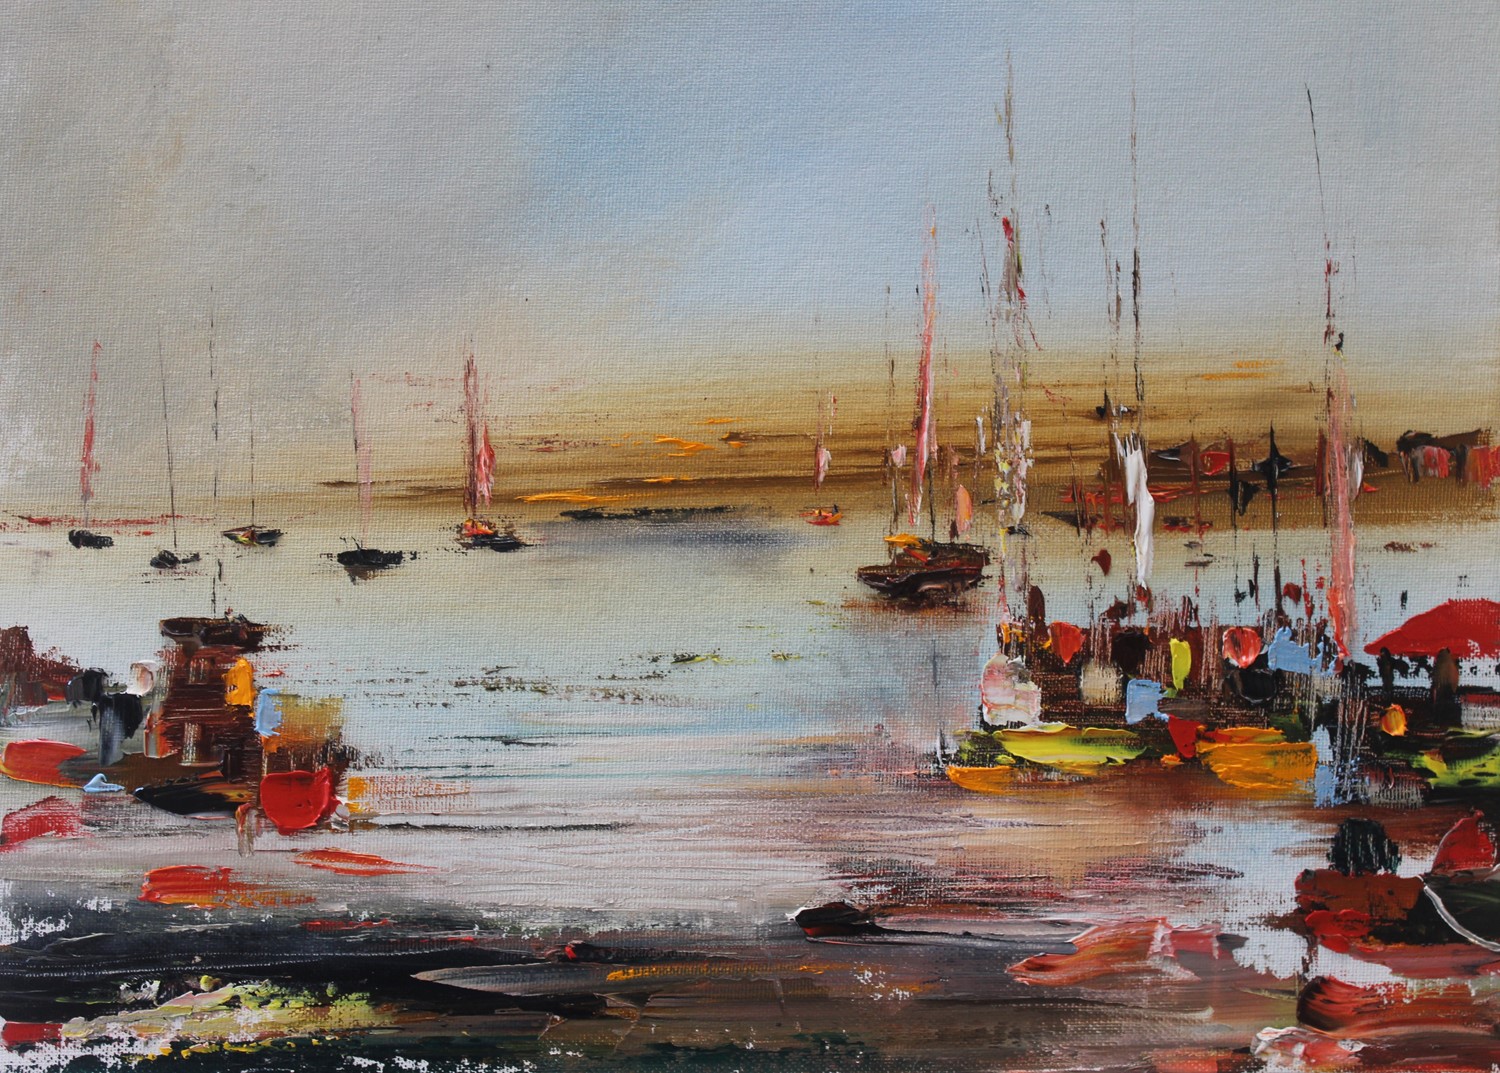 'In the Harbour' by artist Rosanne Barr